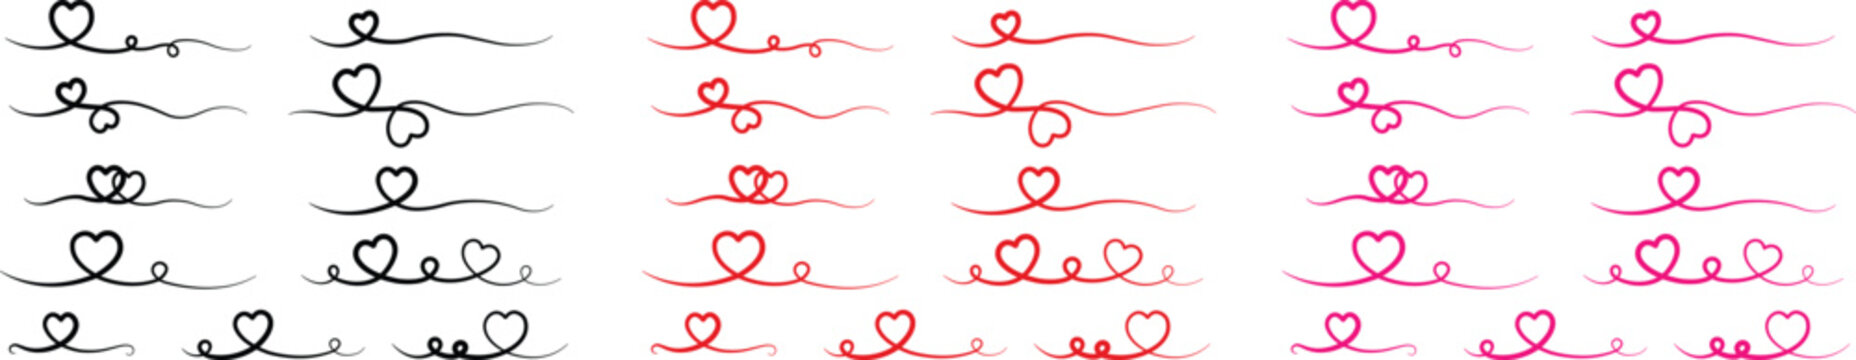 heart lines bundle hand drawn doodle love pink, red or black color icon set isolated on transparent 